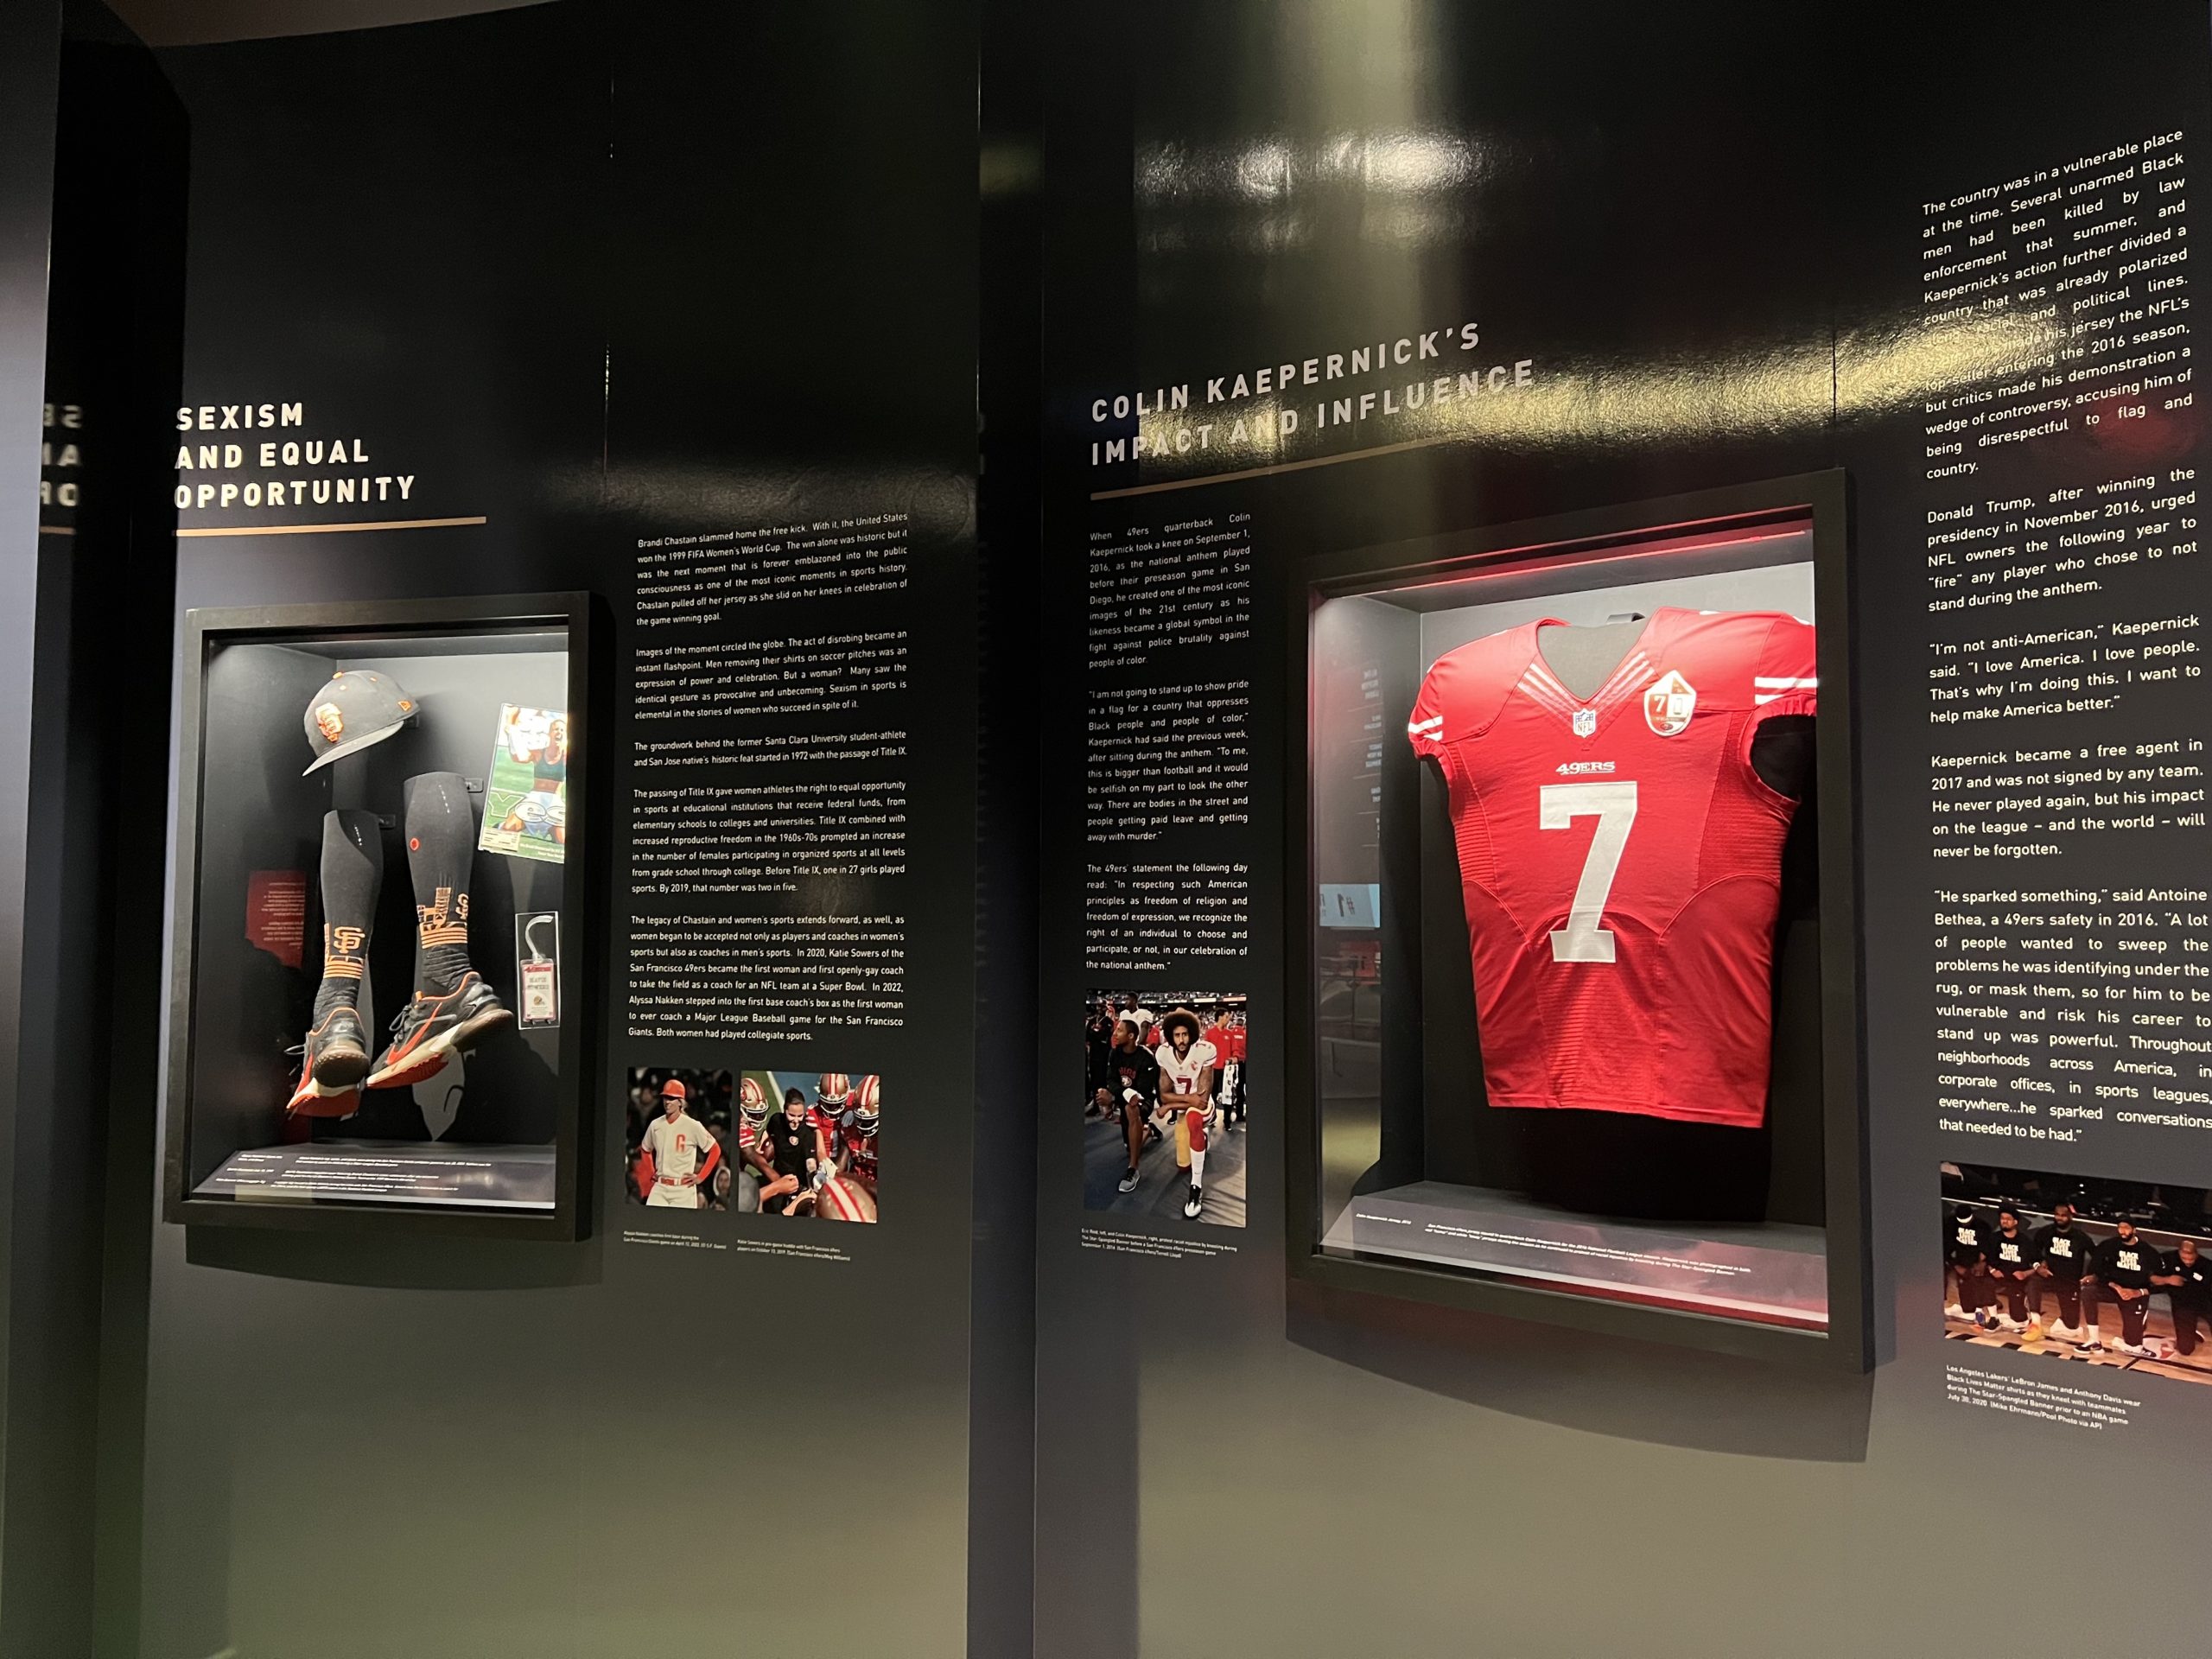 49ers Museum Unveils “The Long Game” Exhibit That Focuses on Social Justice